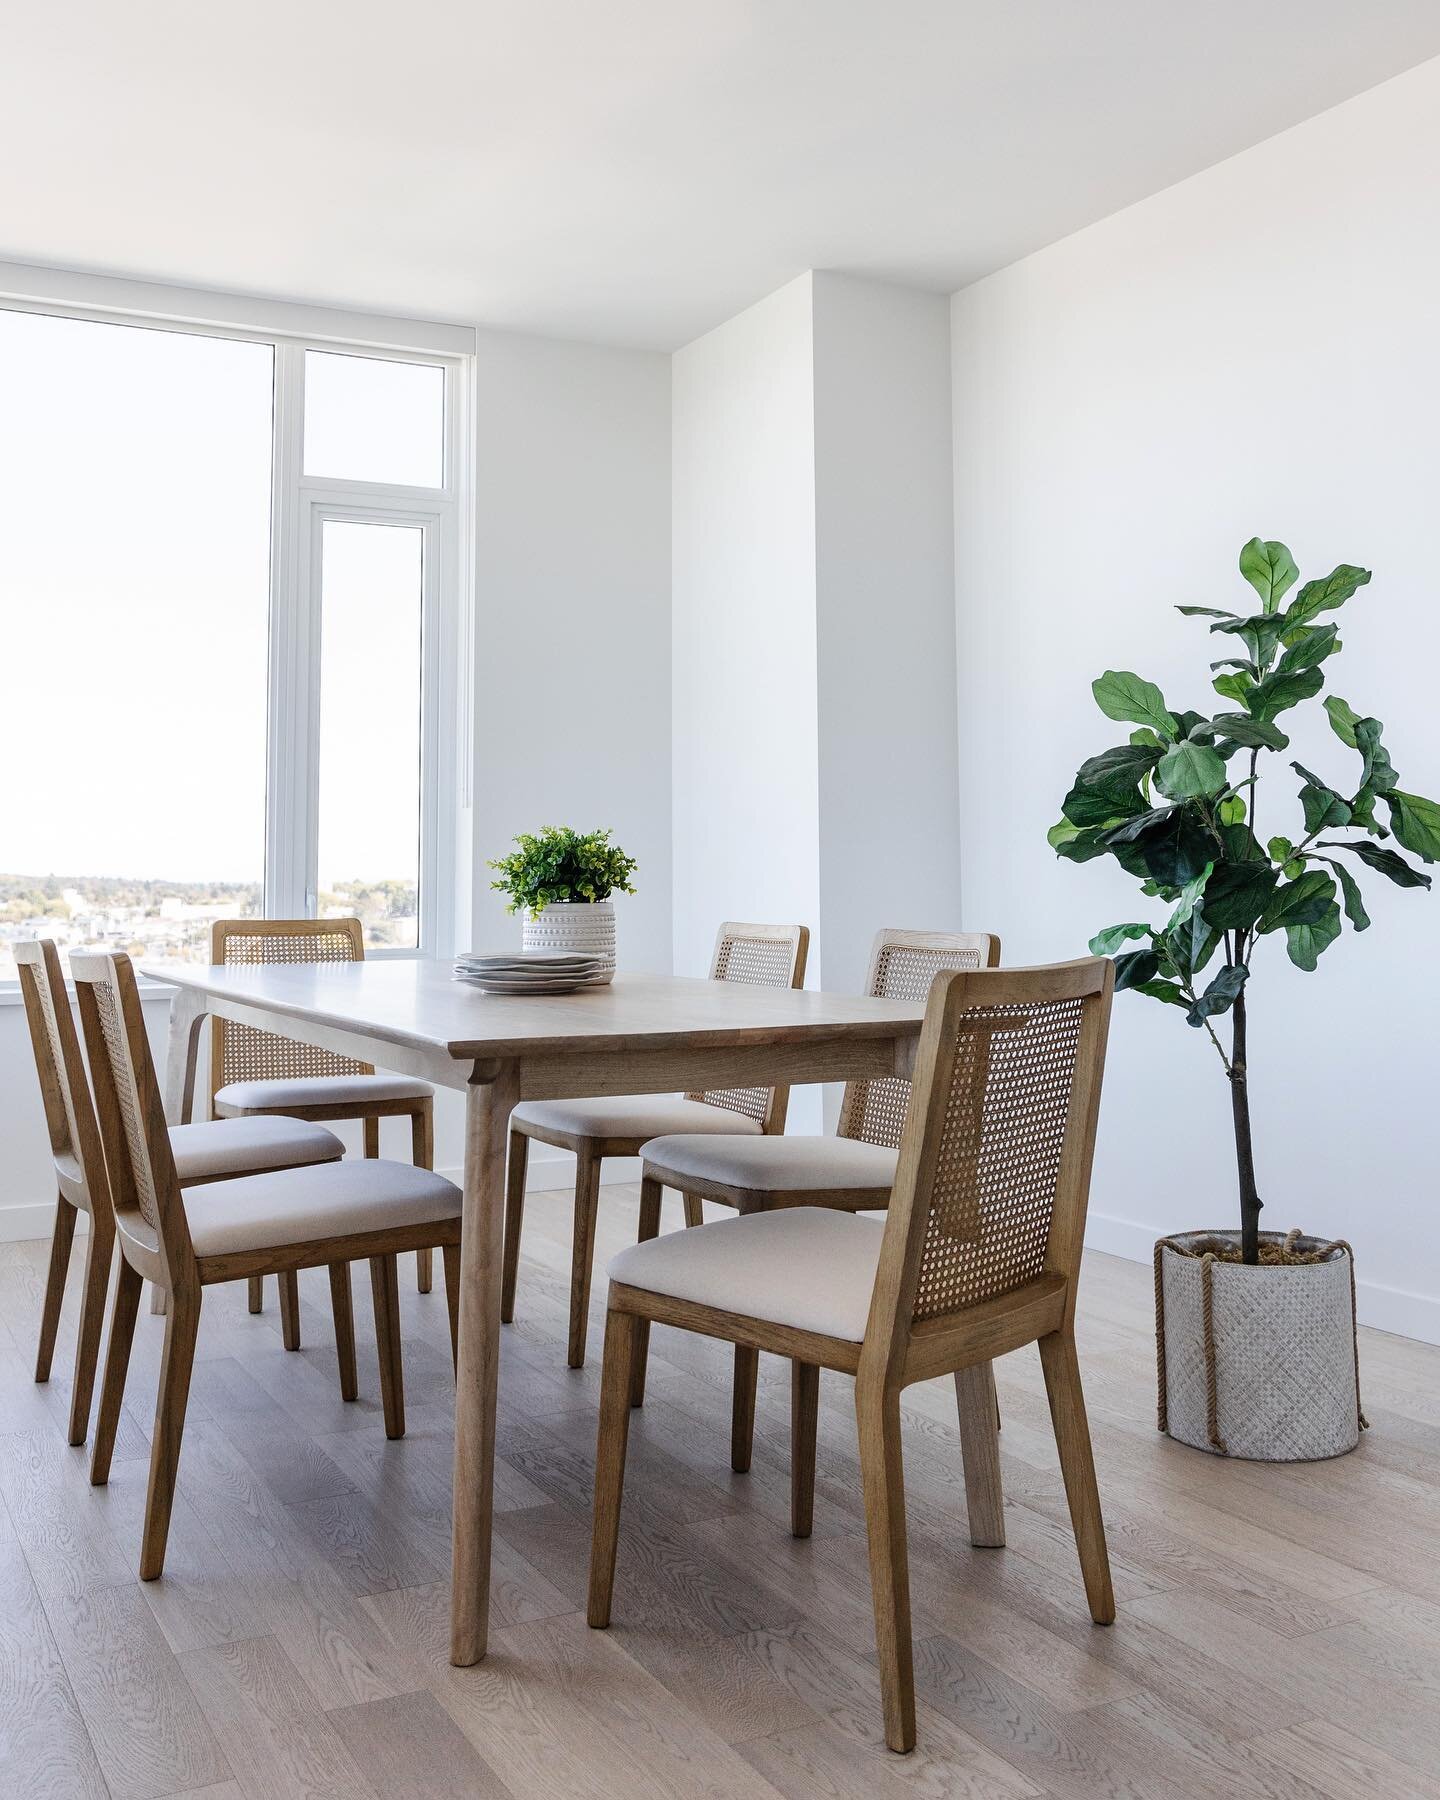 When we choose furniture for Avenue One, we love a timeless style, this dining set is a beautiful mix of modern and contemporary influences. Made with acacia wood and clean lines, it brings a lasting warmth to this beautiful bright space.  And the Ra